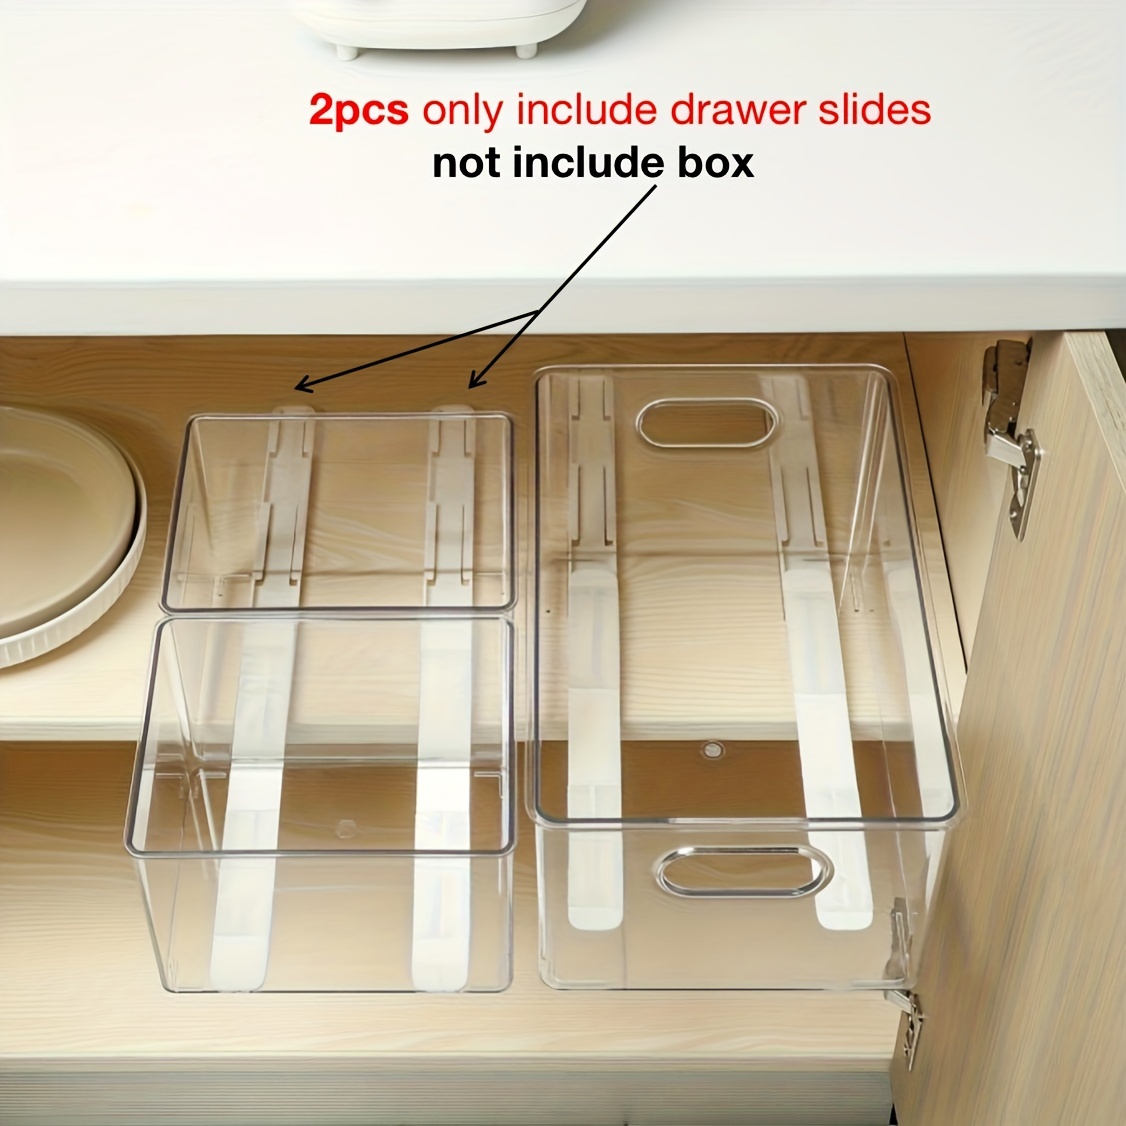 

Upgrade Your Drawers With 2pcs Of Telescopic Rail Accessories - Diy Drawer Rails